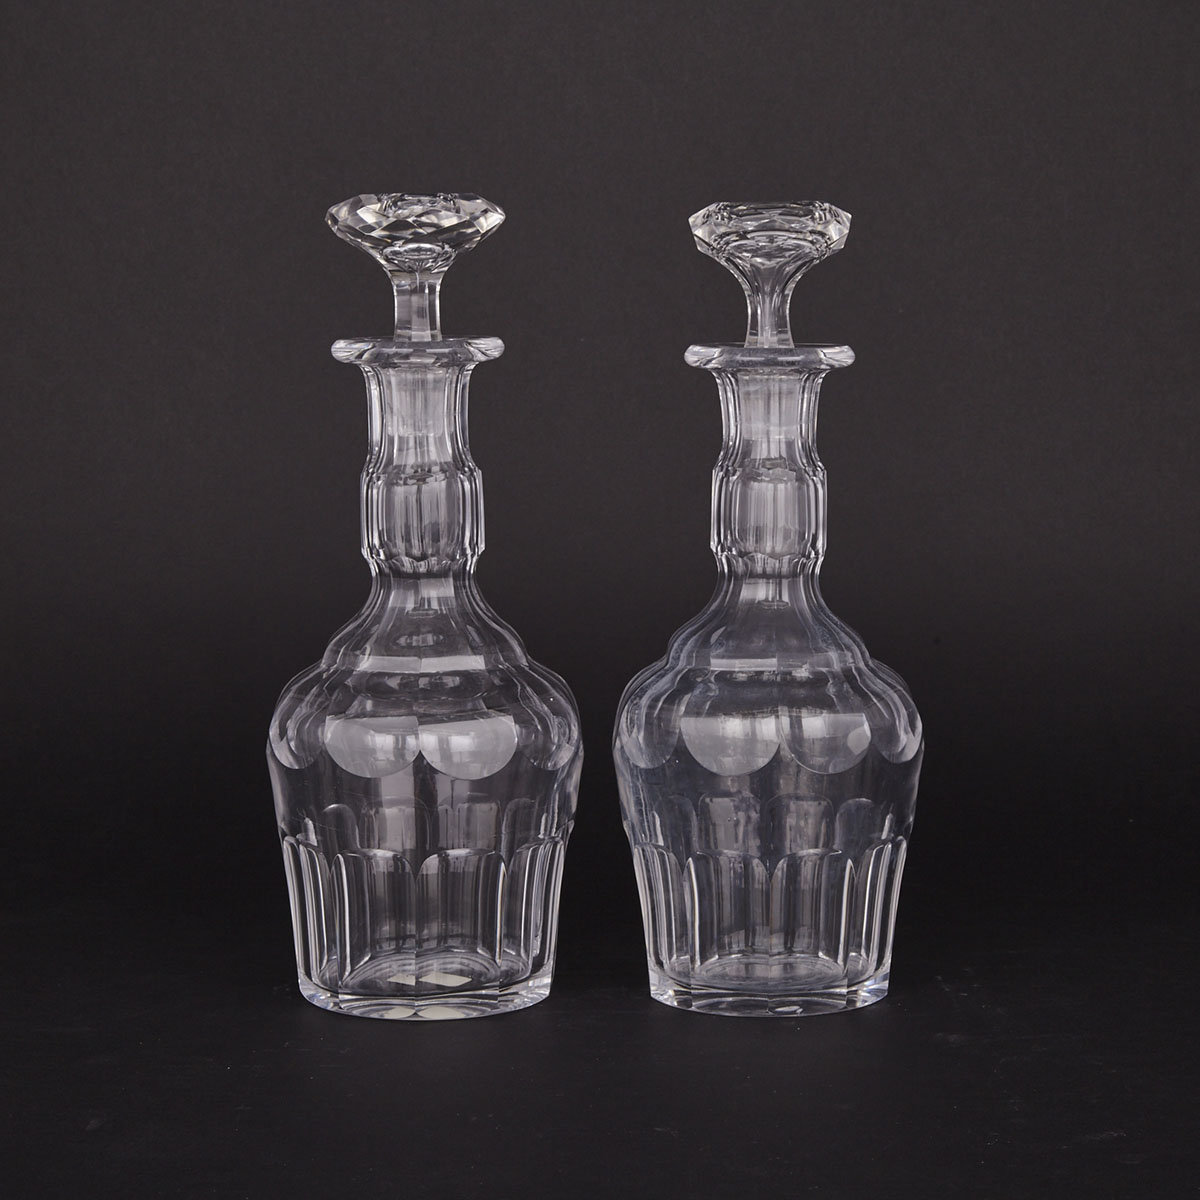 Pair of English Cut Glass Decanters, 19th century